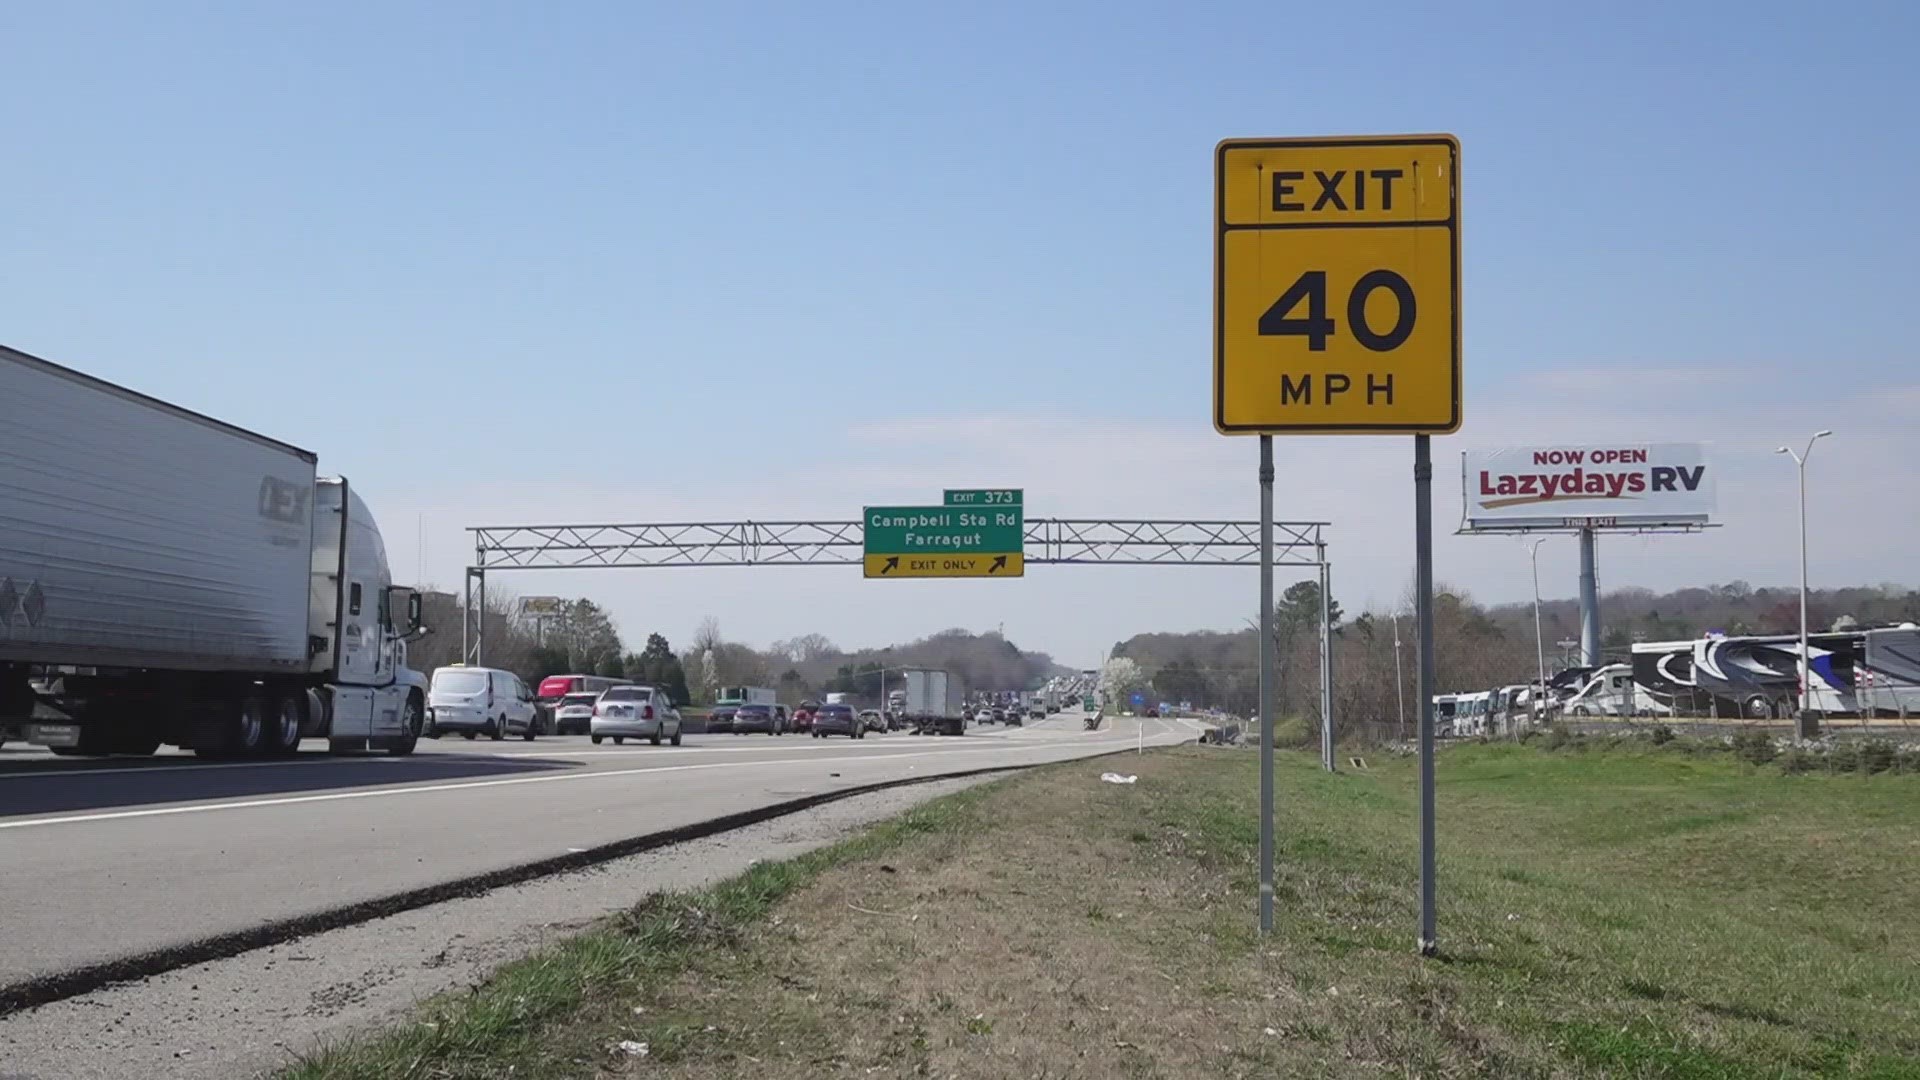 The improvements will cost around $100 million and are meant to ease congestion, according to TDOT.